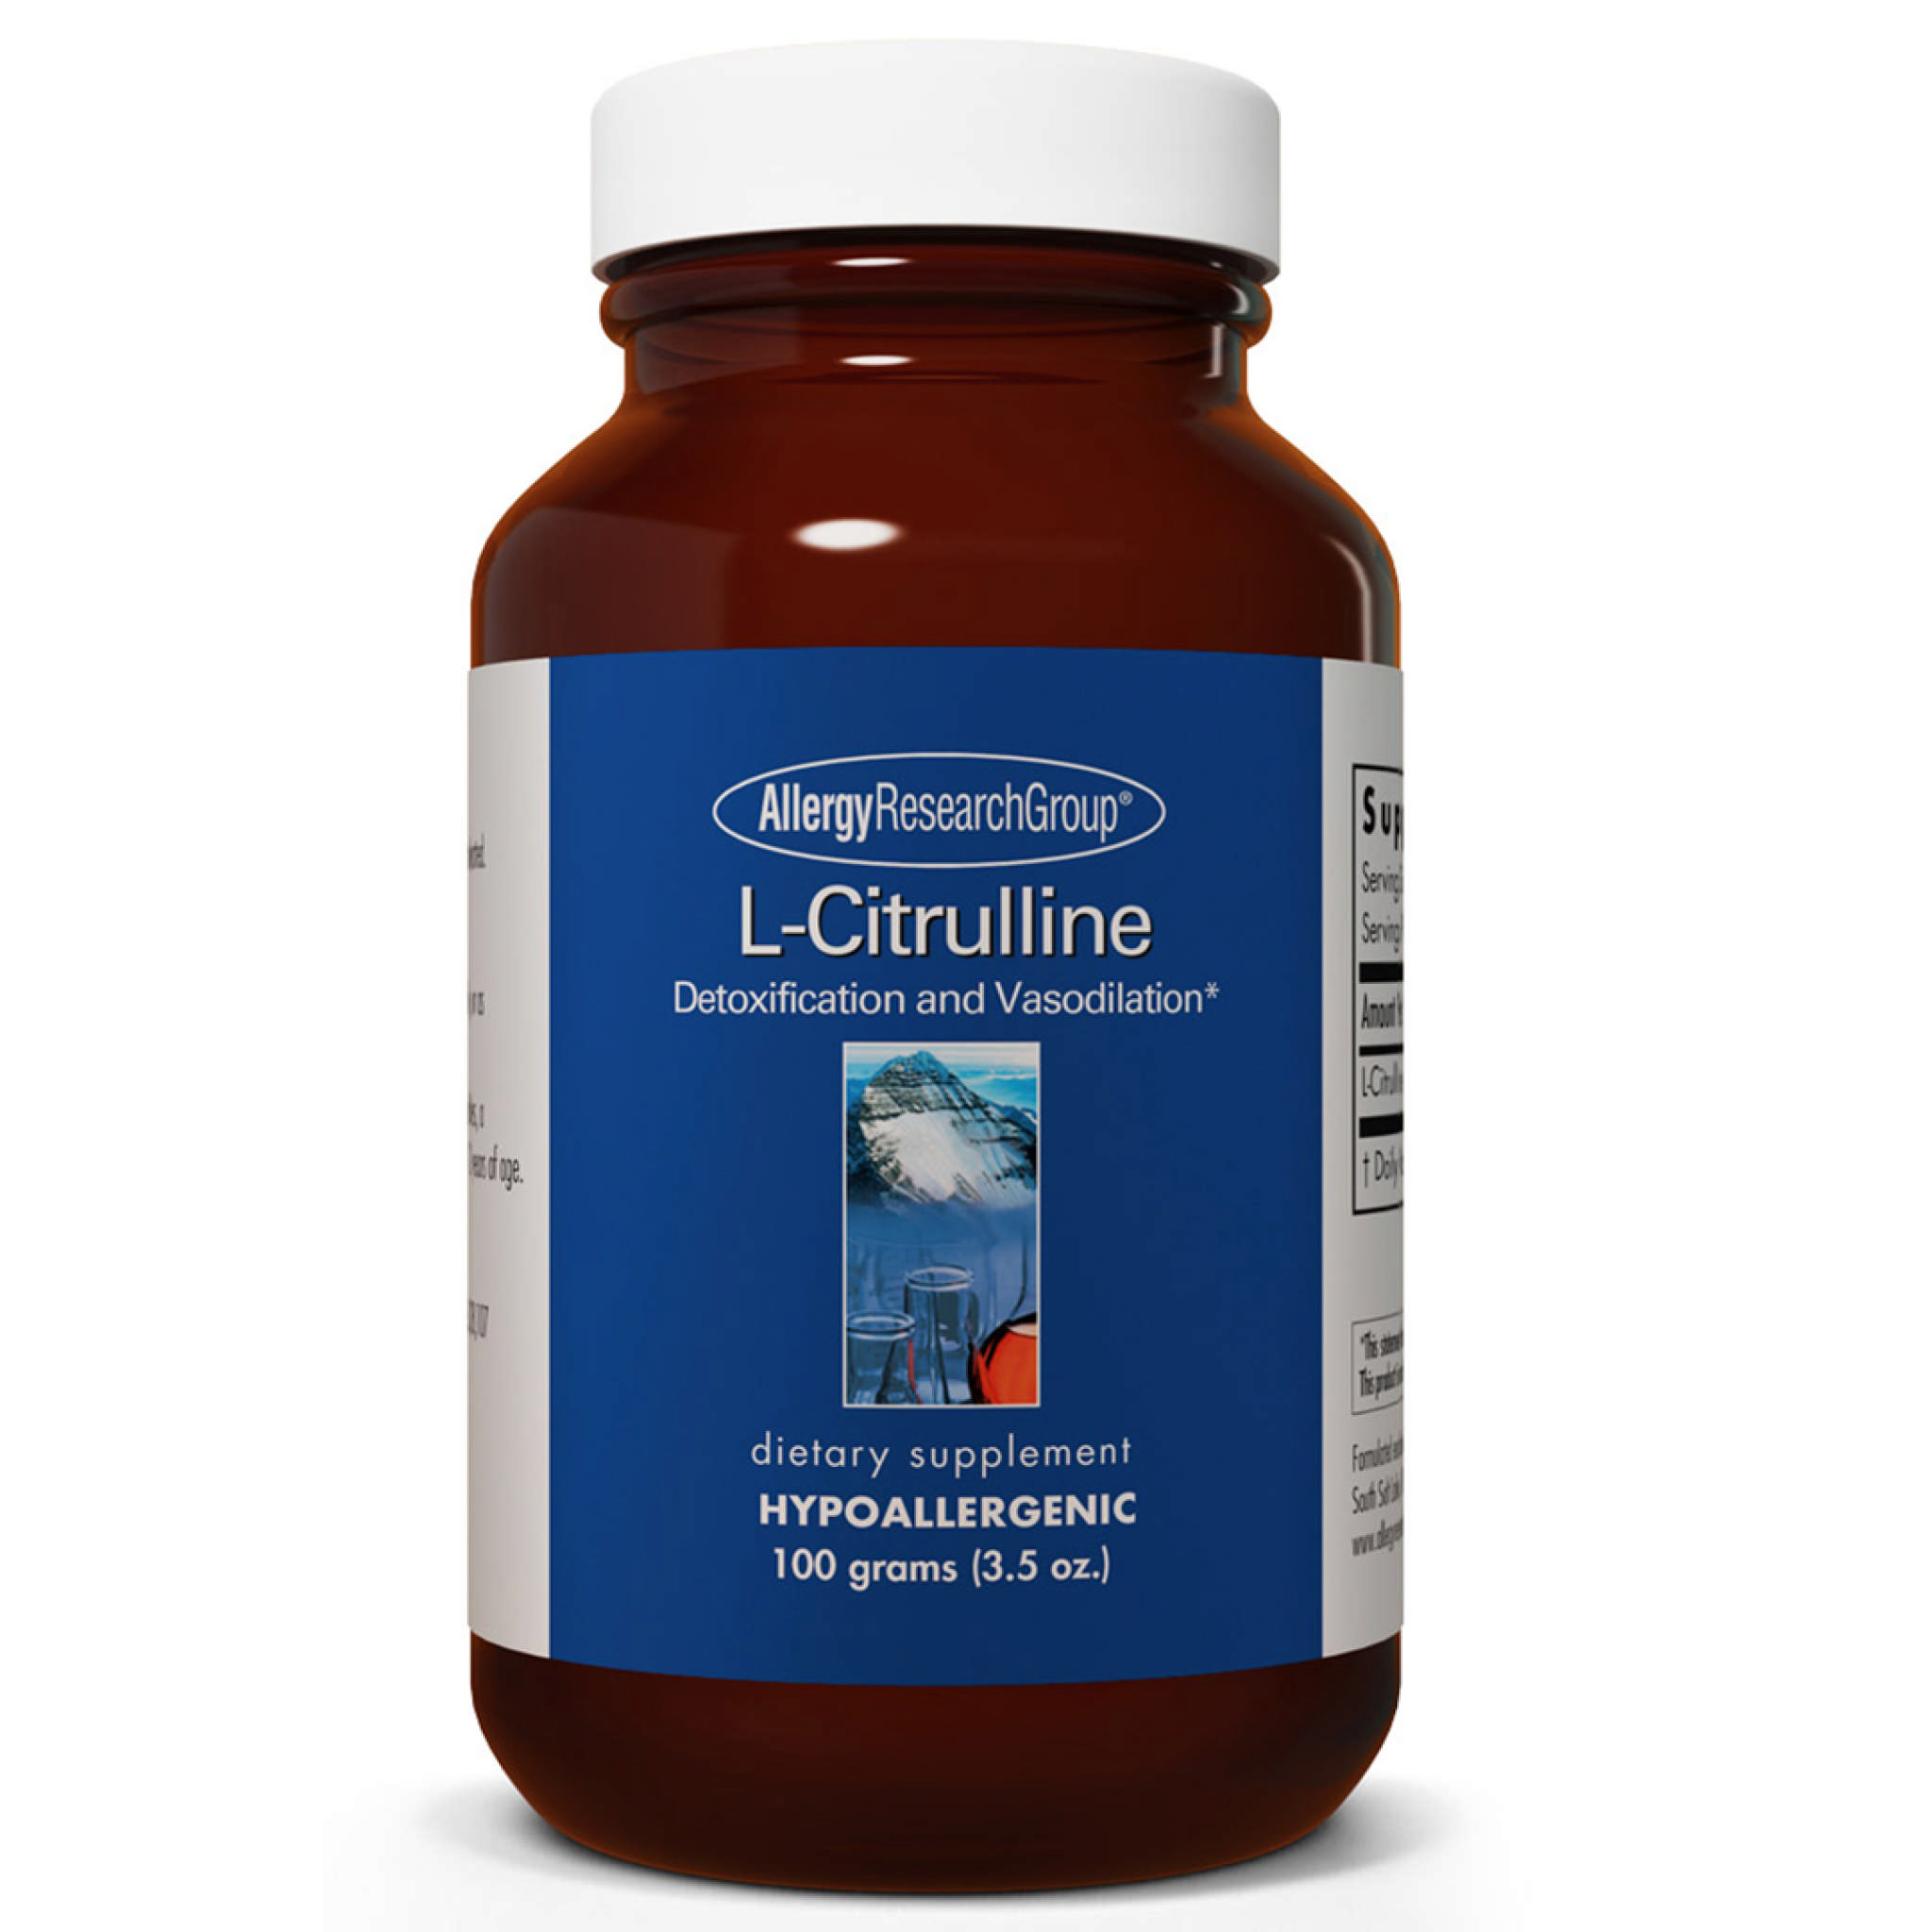 Allergy Research Group - Citrulline powder